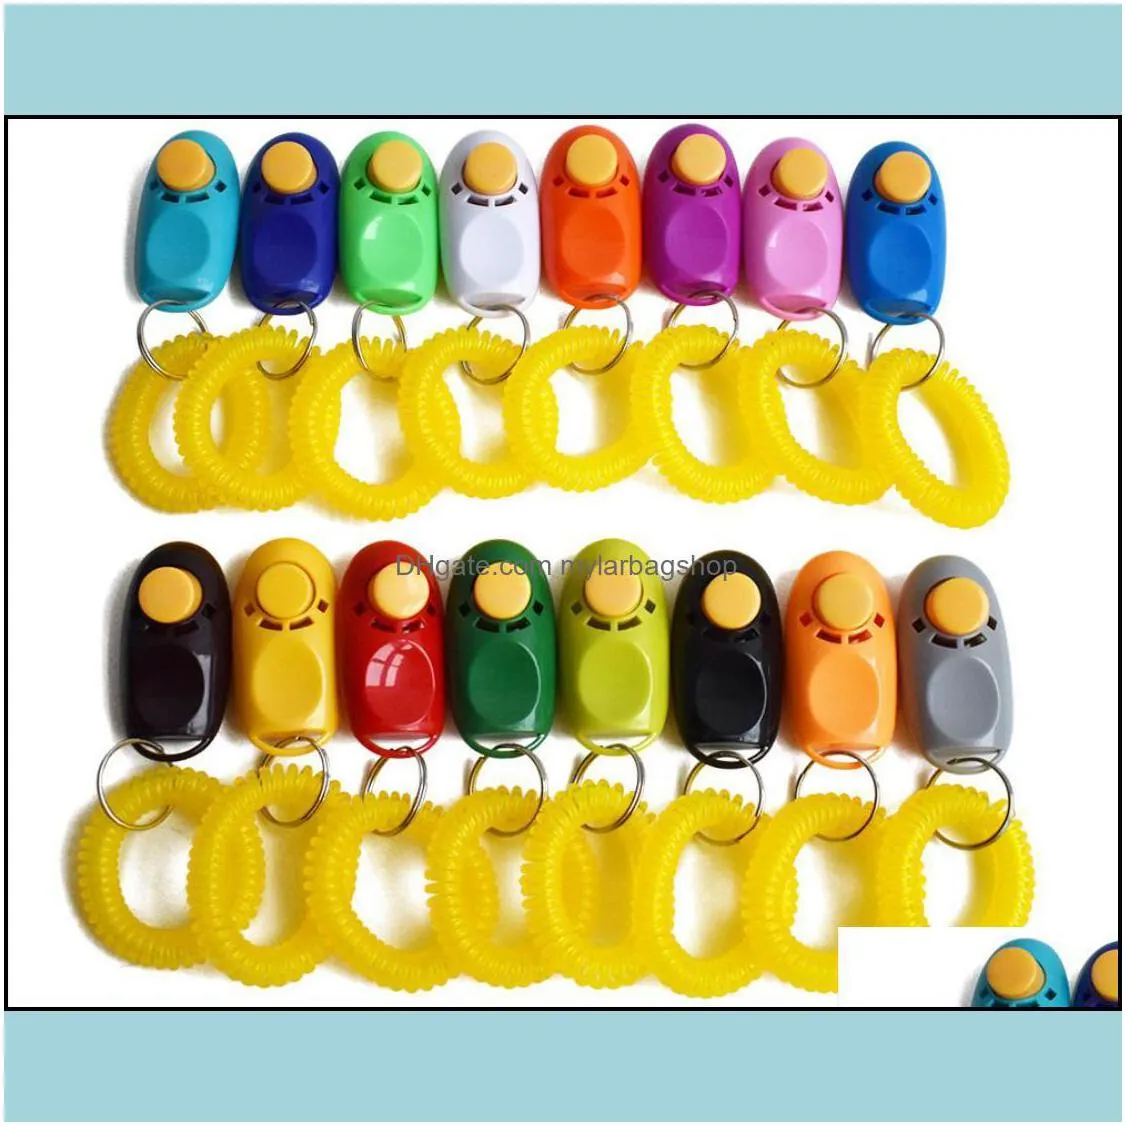 dog training obedience supplies pet home garden button clicker sound trainer with wrist band aid guide click tool dogs 11 colors 100pcs